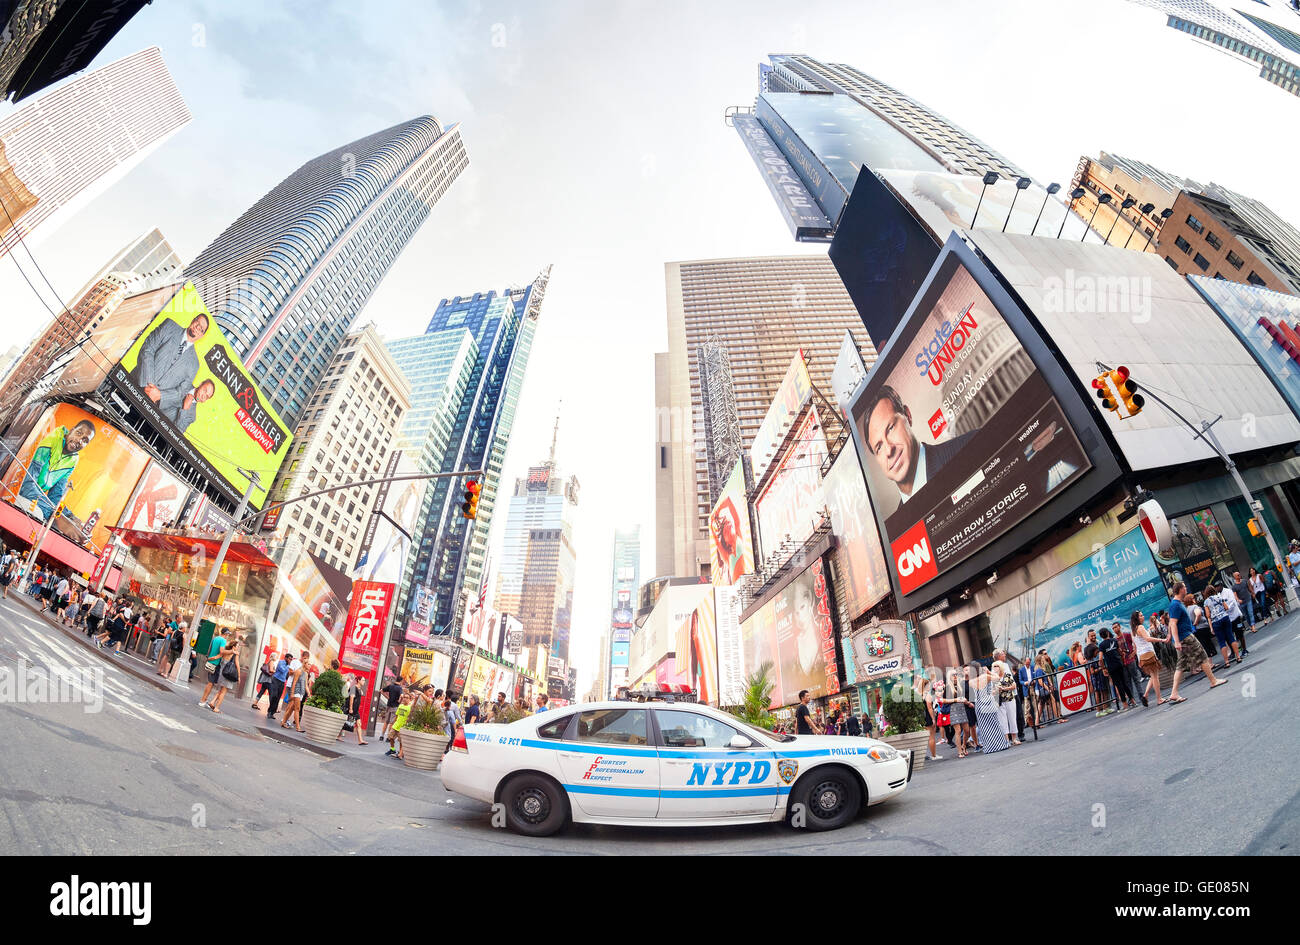 Fisheye lens photo of a NYPD patrol car parked at the Times Square. Stock Photo